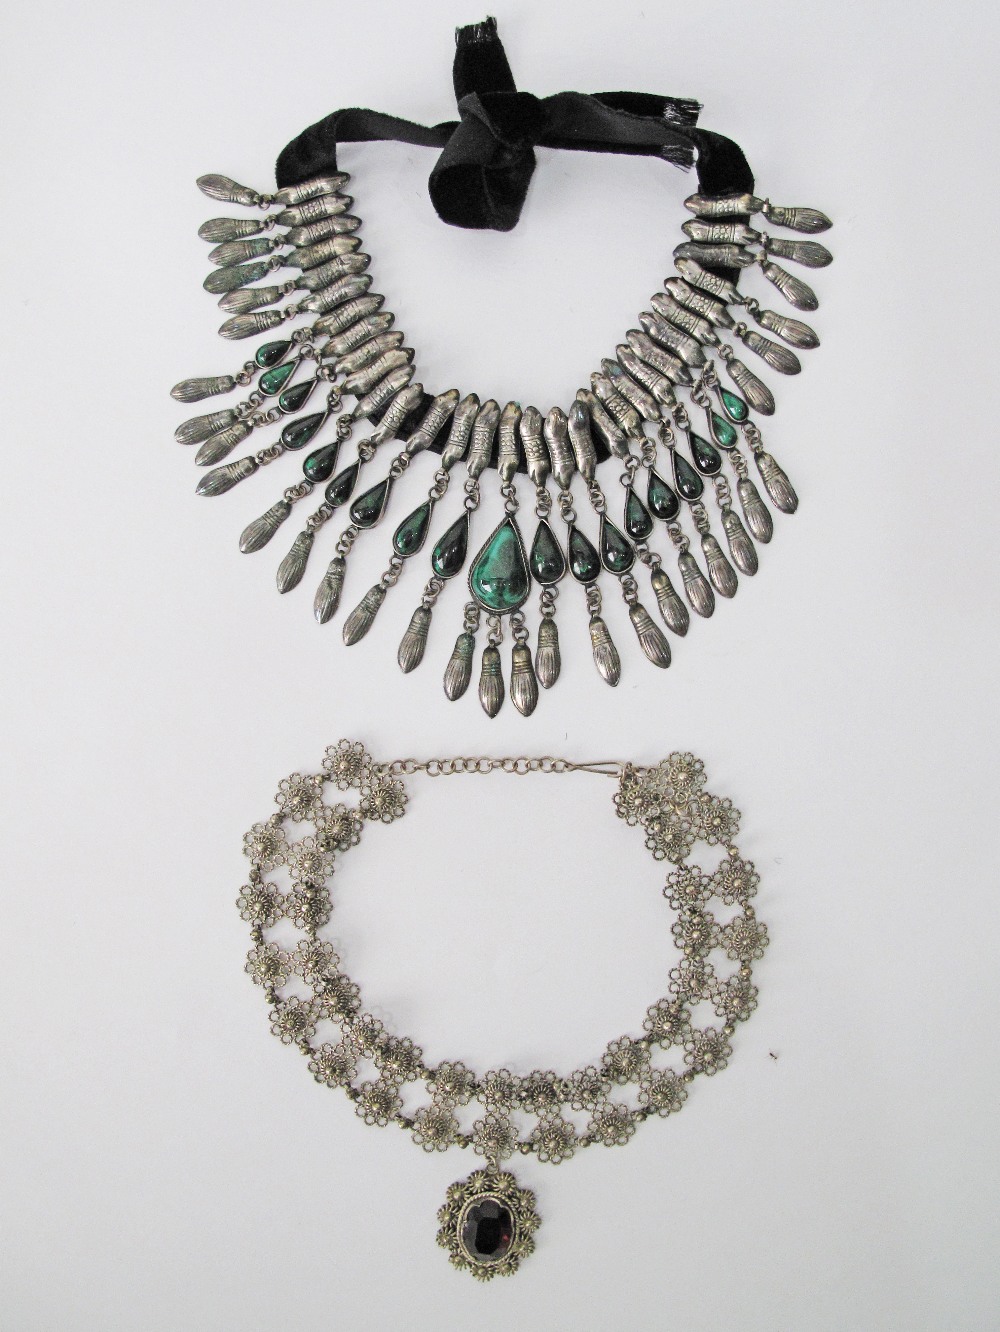 Silver Armenian traditional / ethnic / folk jewelry, one necklace with malachite inset stones hang